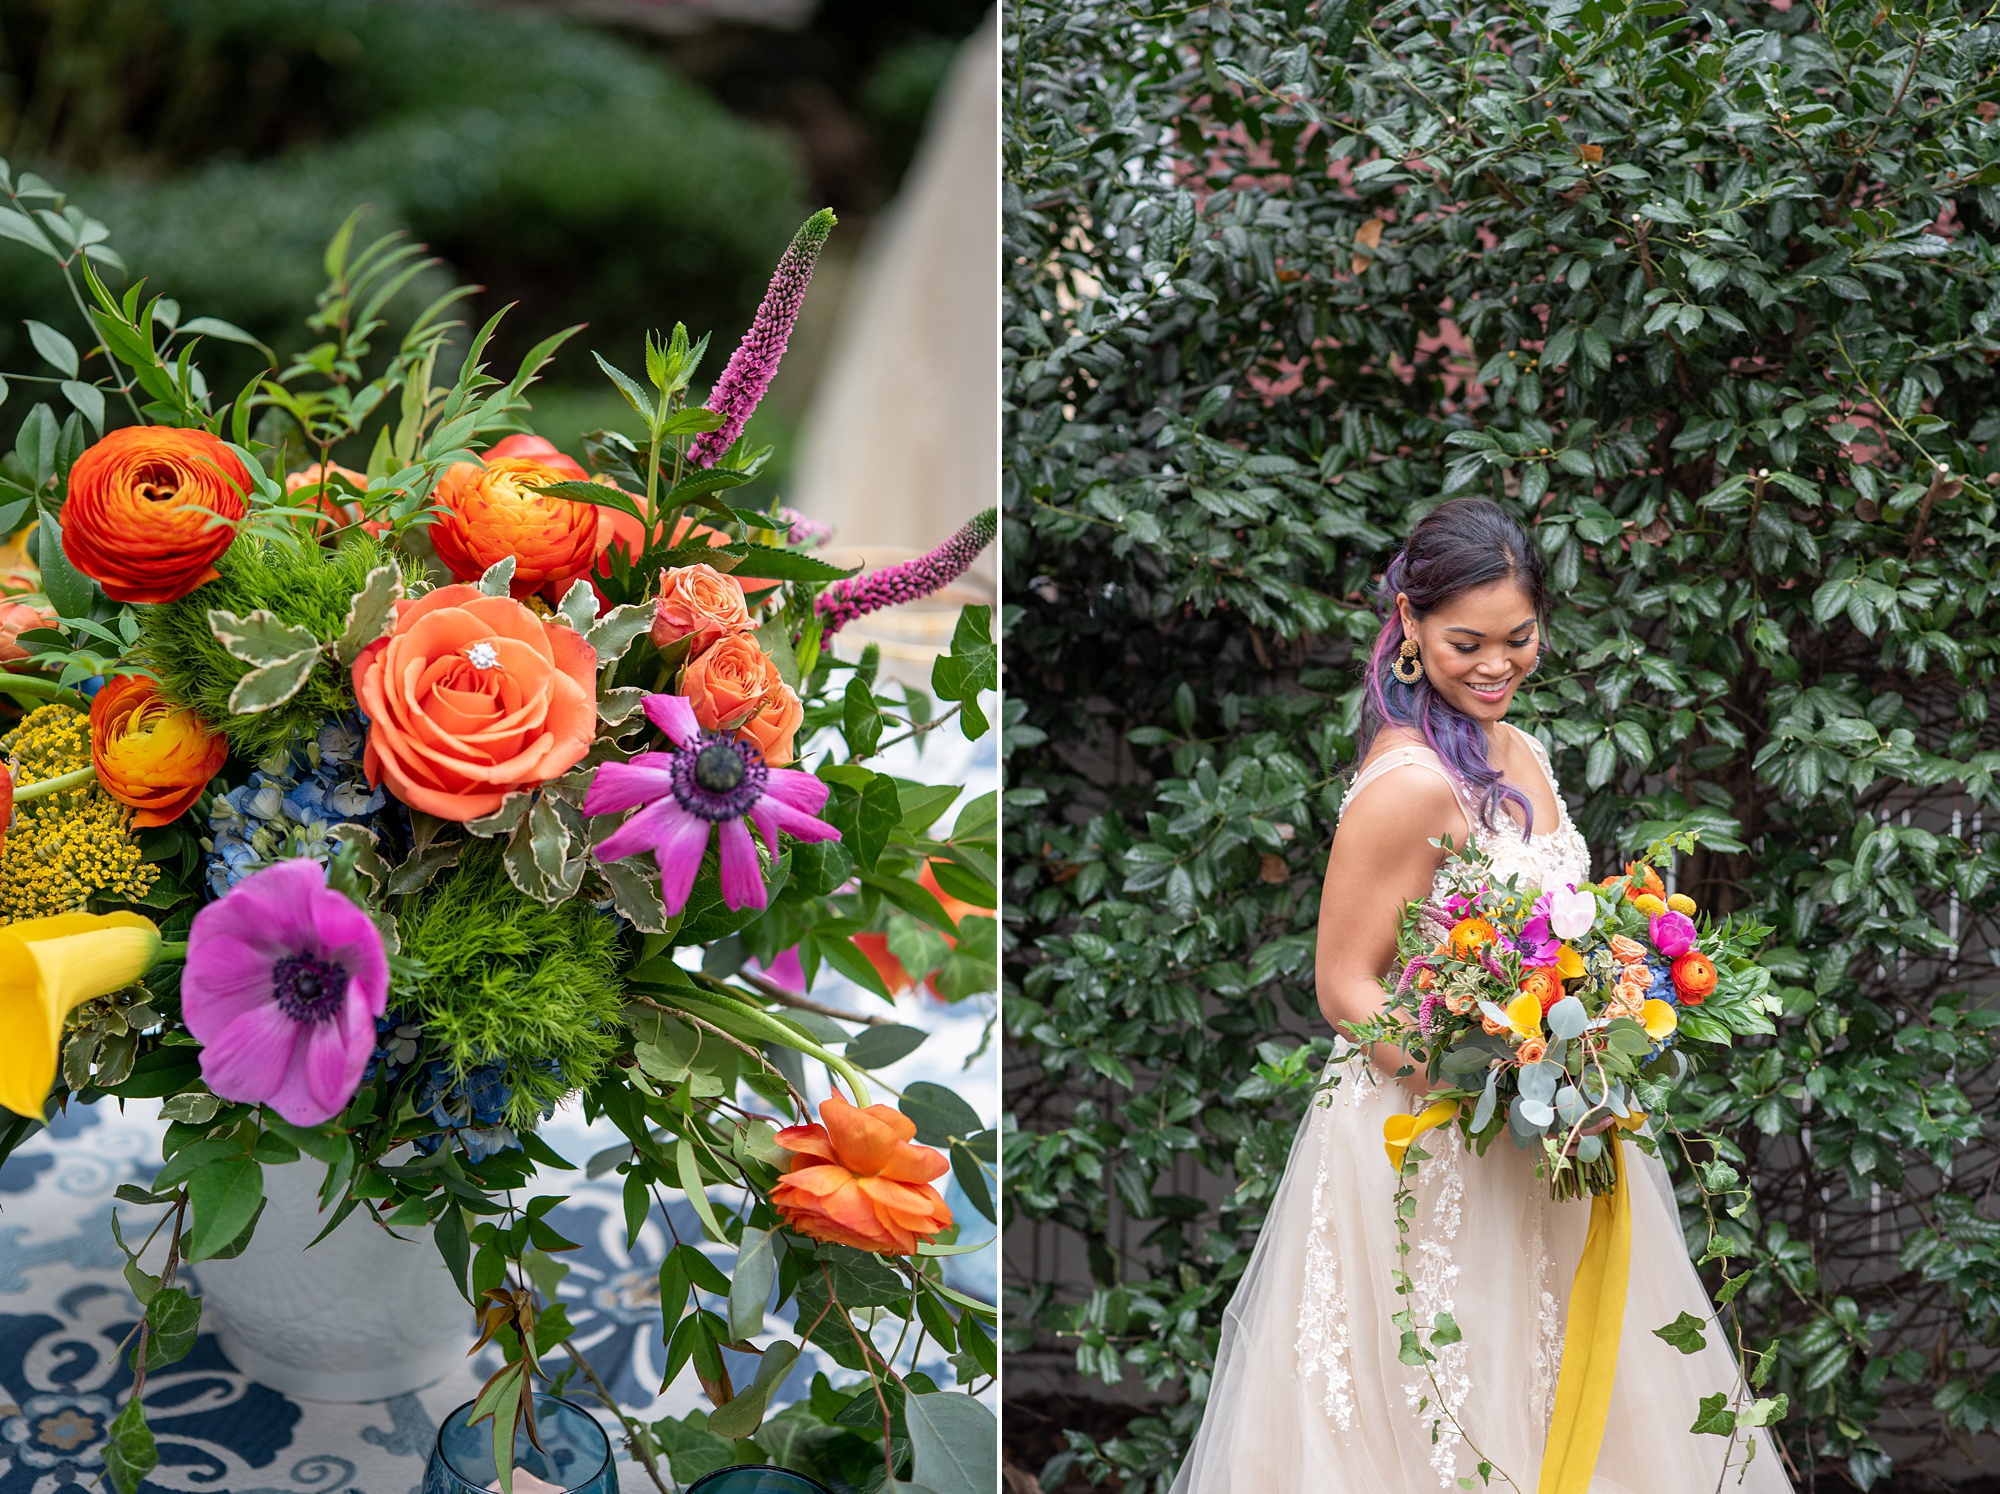 Italian inspired microwedding styled shoot with colorful bridal details